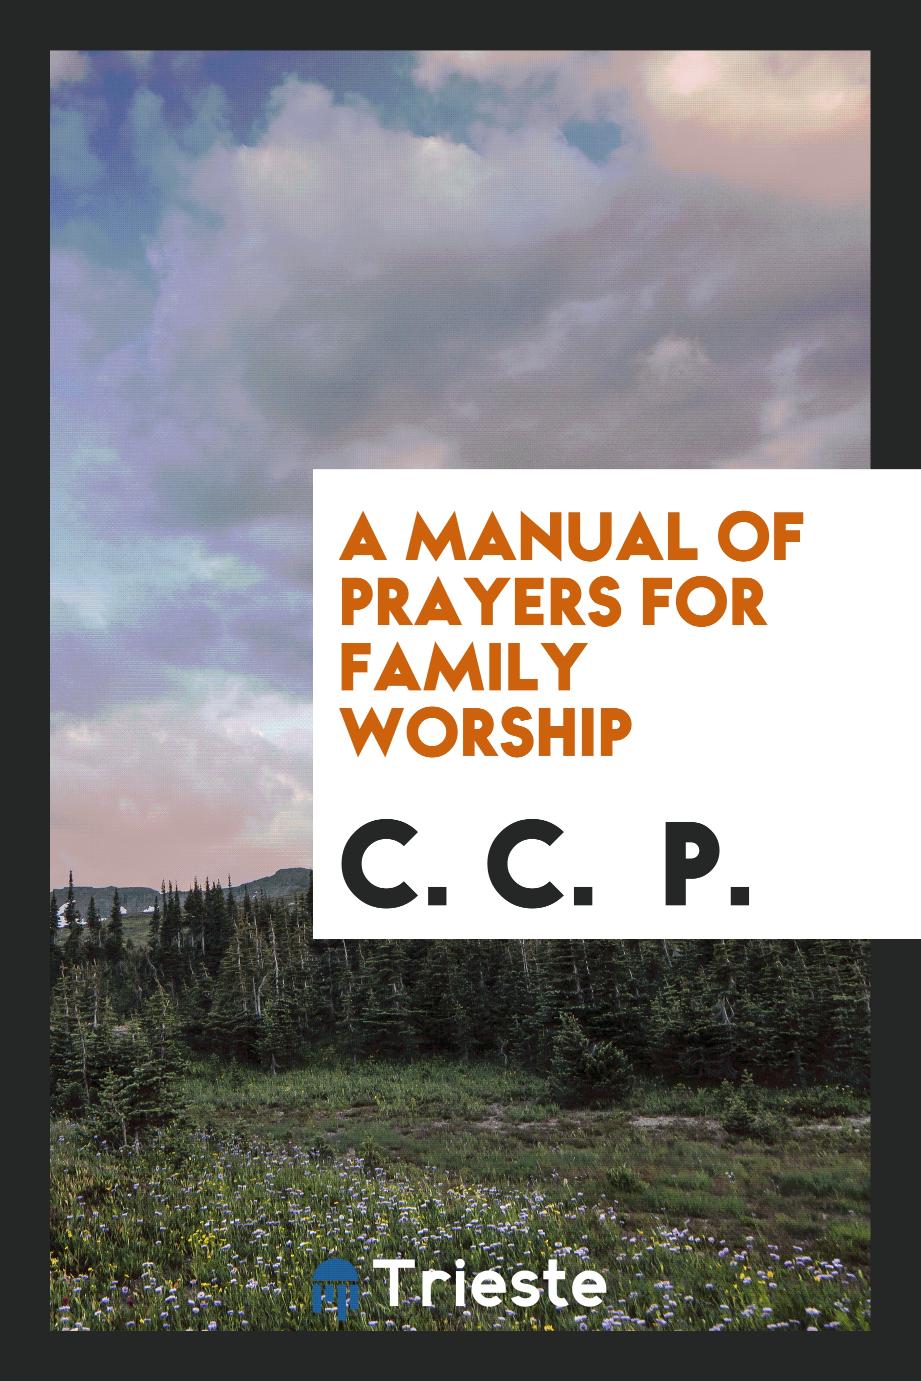 A Manual of Prayers for Family Worship